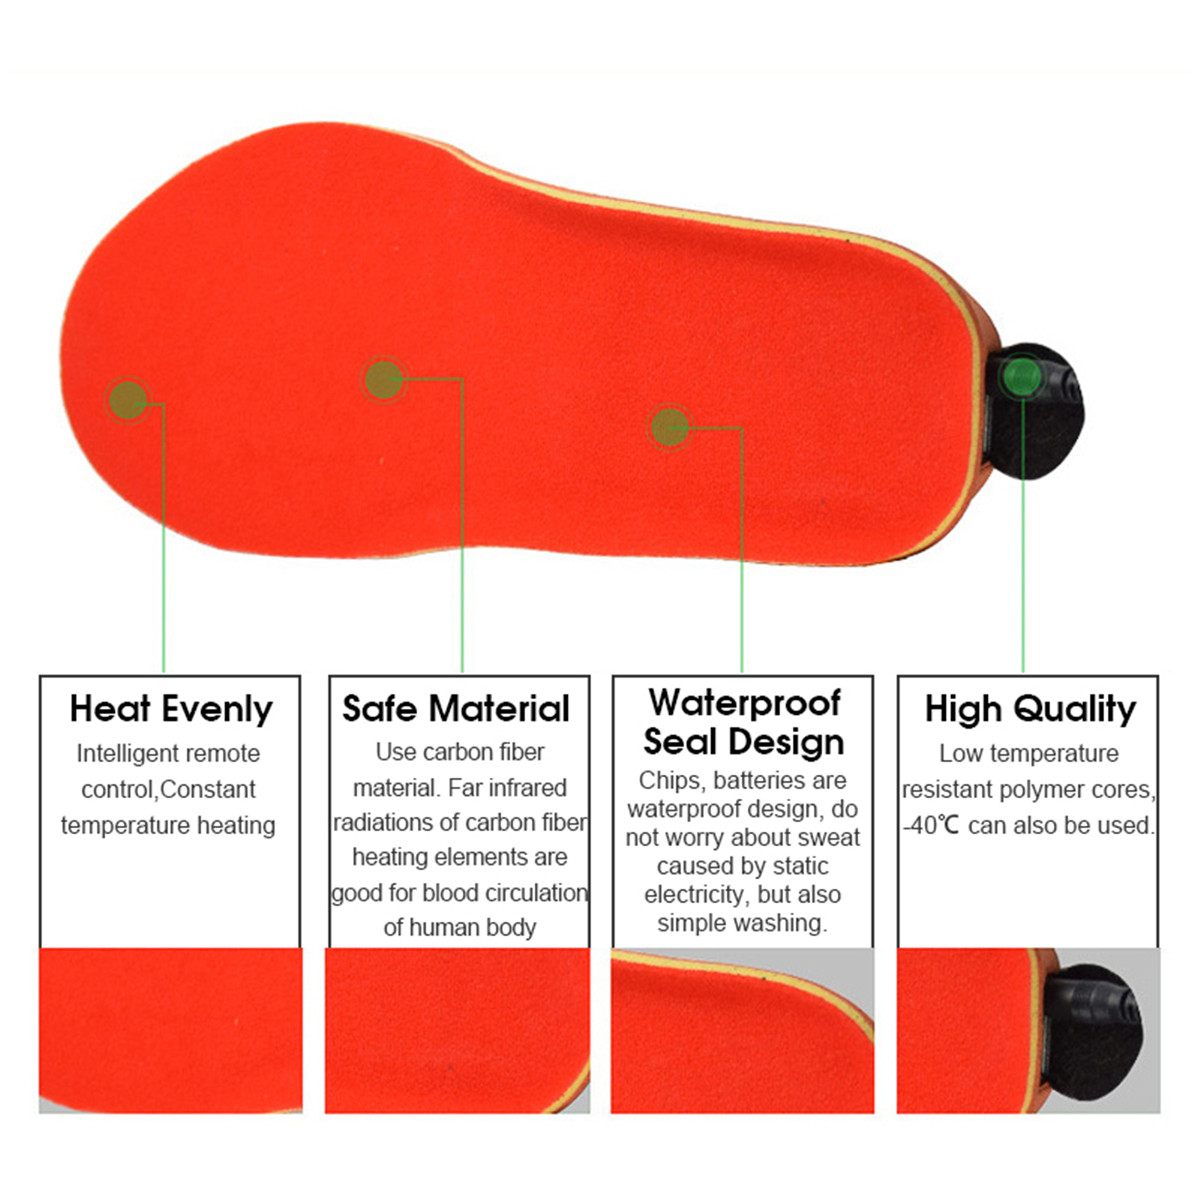 37V-1900mAh-Electronic-Rechargeable-Winter-Heated-Insole-Shoe-Boot-Foot-Warmer-Heater-Pad-1408164